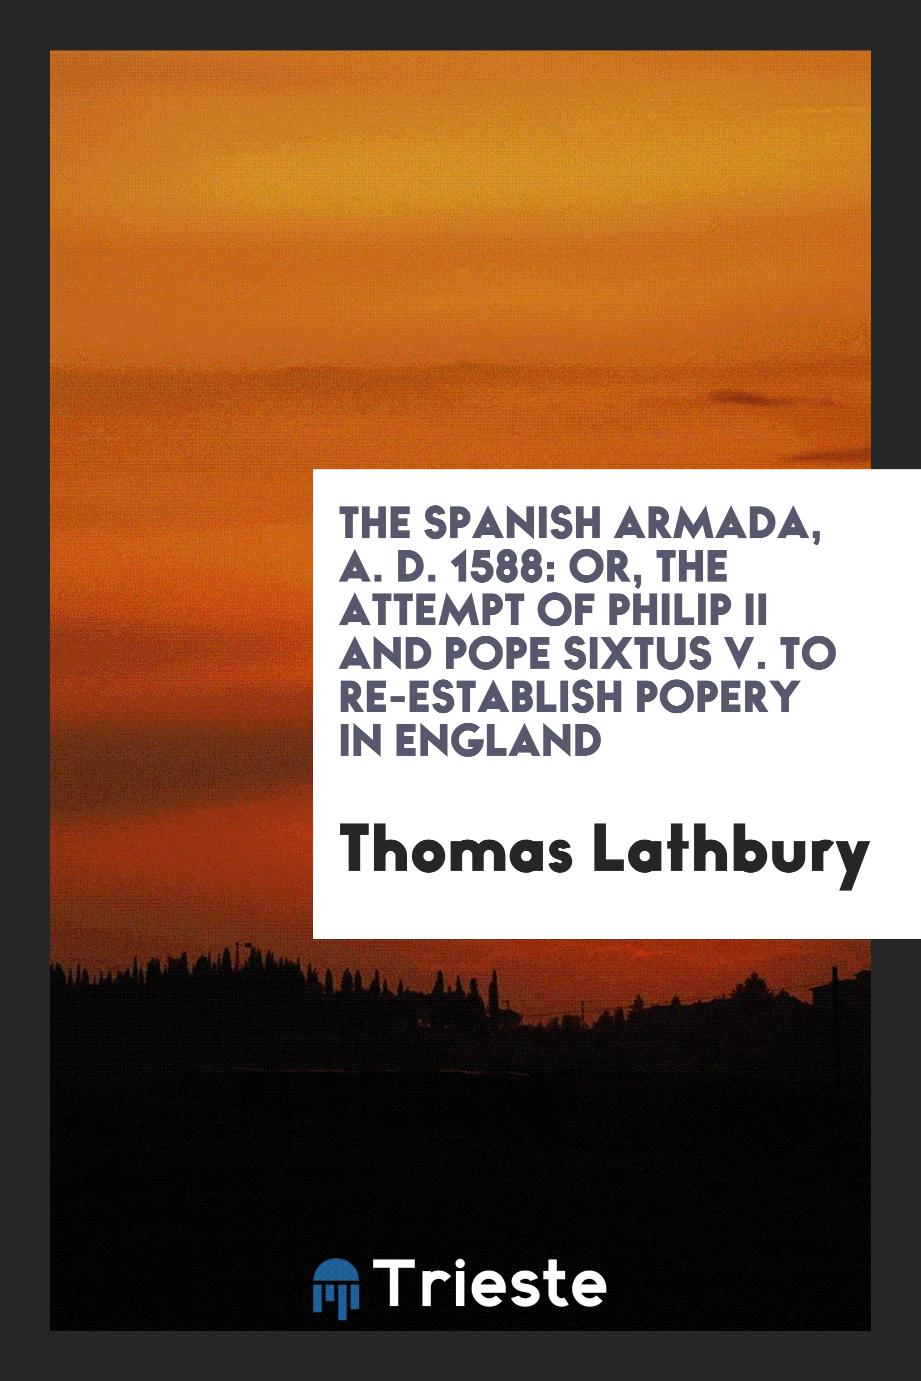 The Spanish Armada, A. D. 1588: Or, the Attempt of Philip II and Pope Sixtus V. To Re-Establish Popery in England